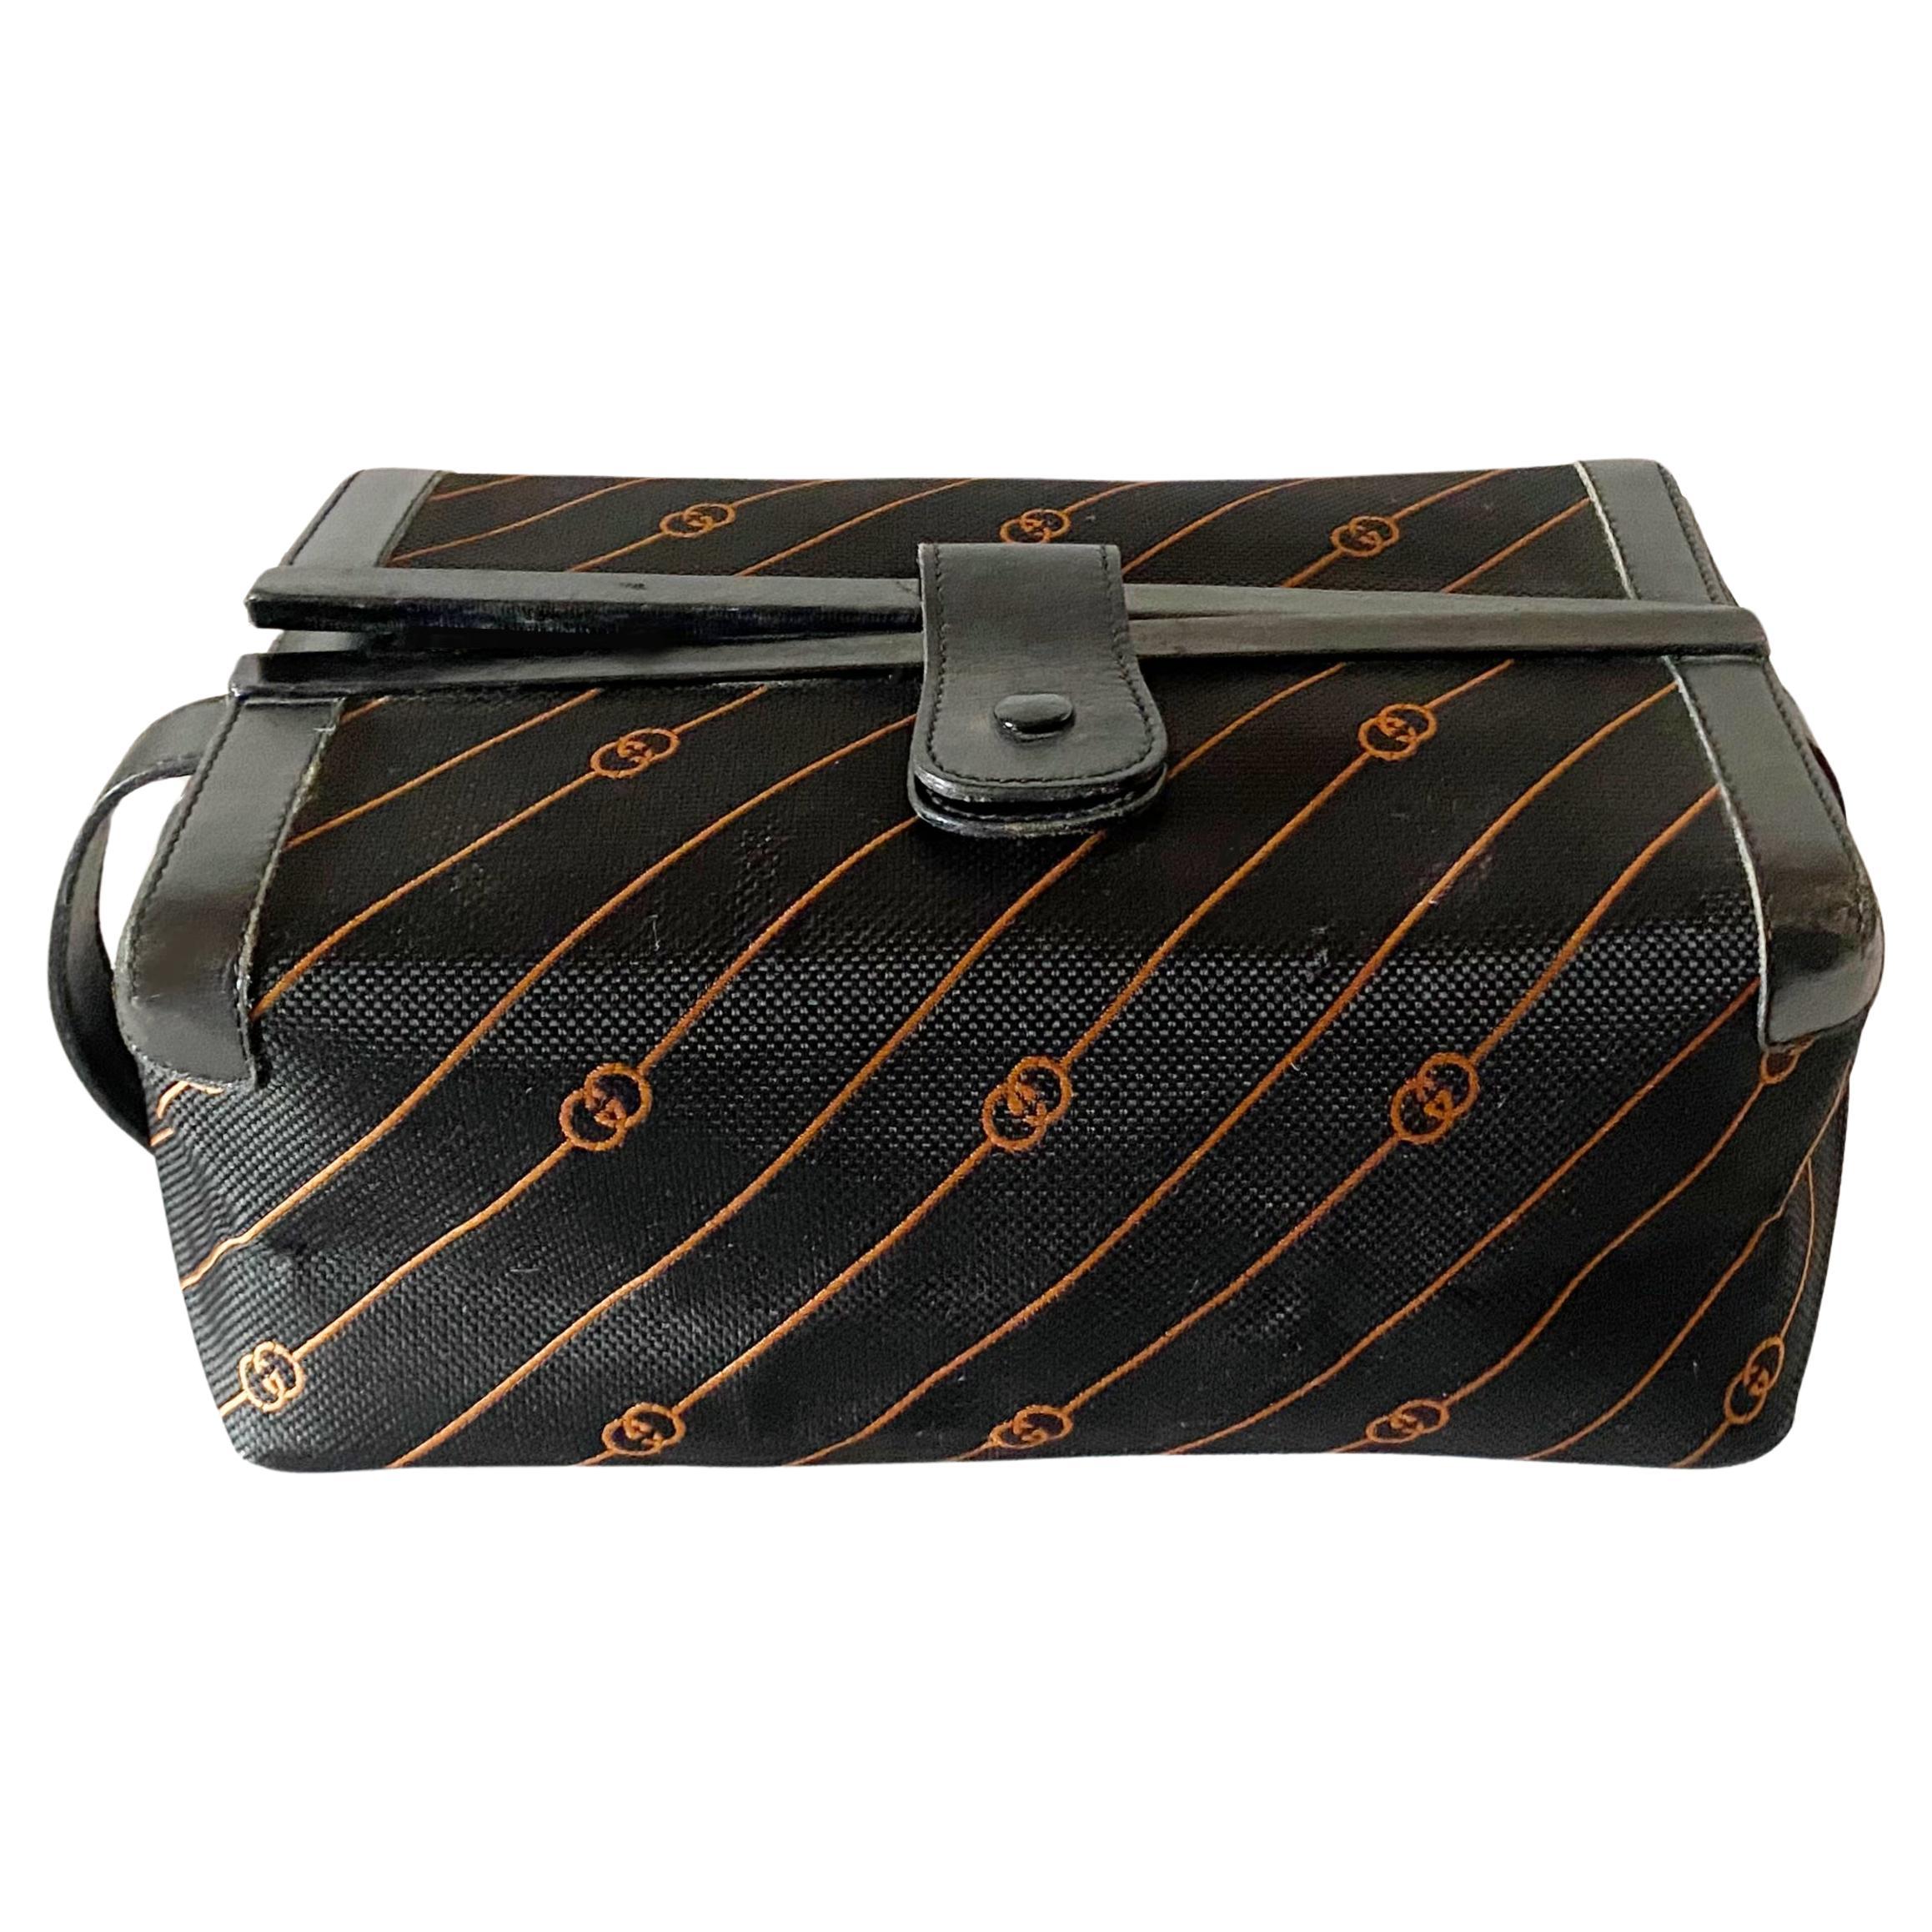 1980s Gucci GG Monogram Leather Canvas Toiletry Bag For Sale at